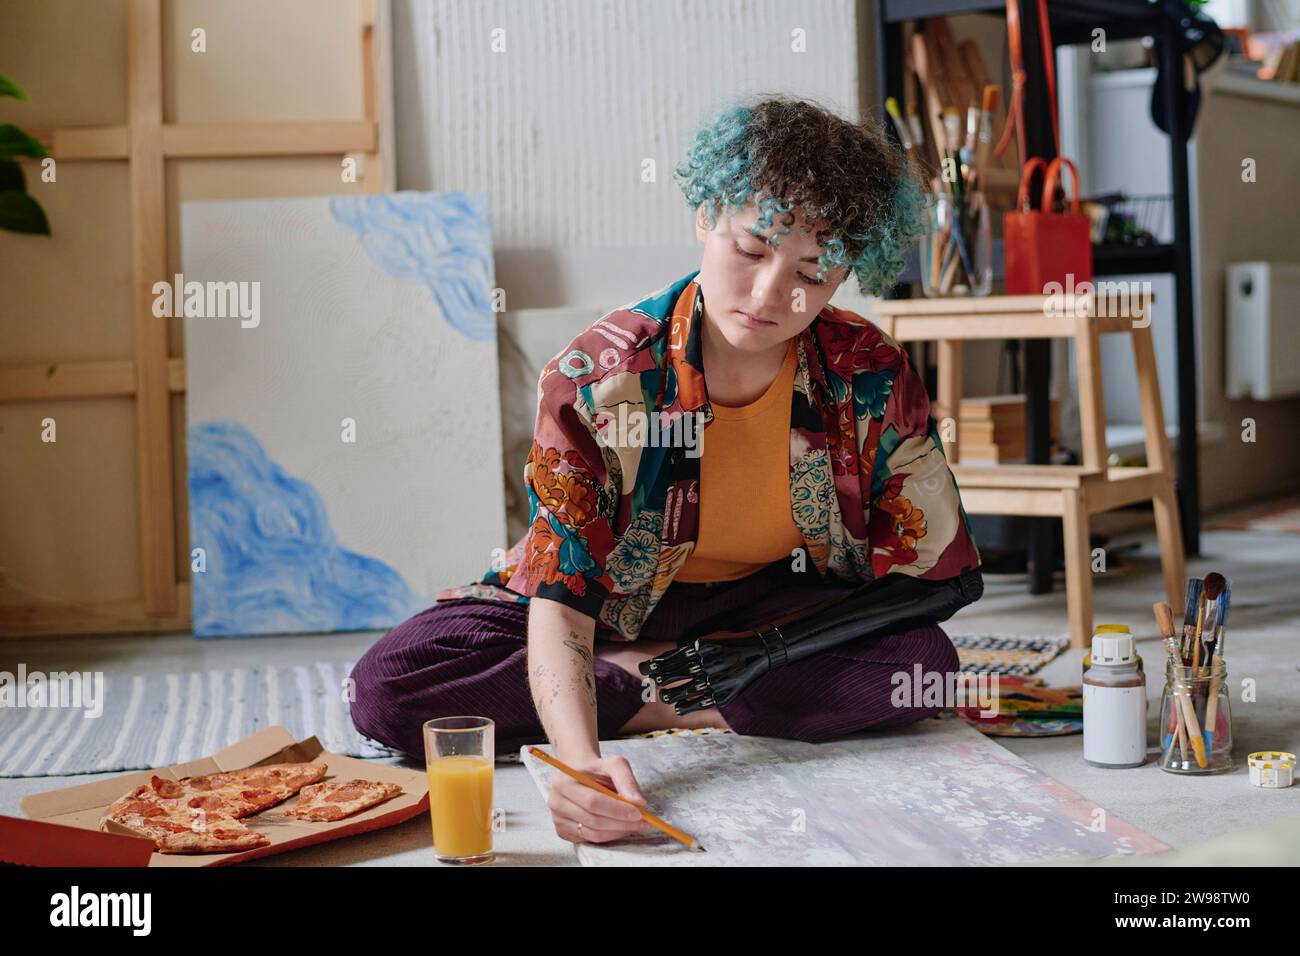 Creative young woman with prosthetic arm having pizza when drawing on canvas Stock Photo